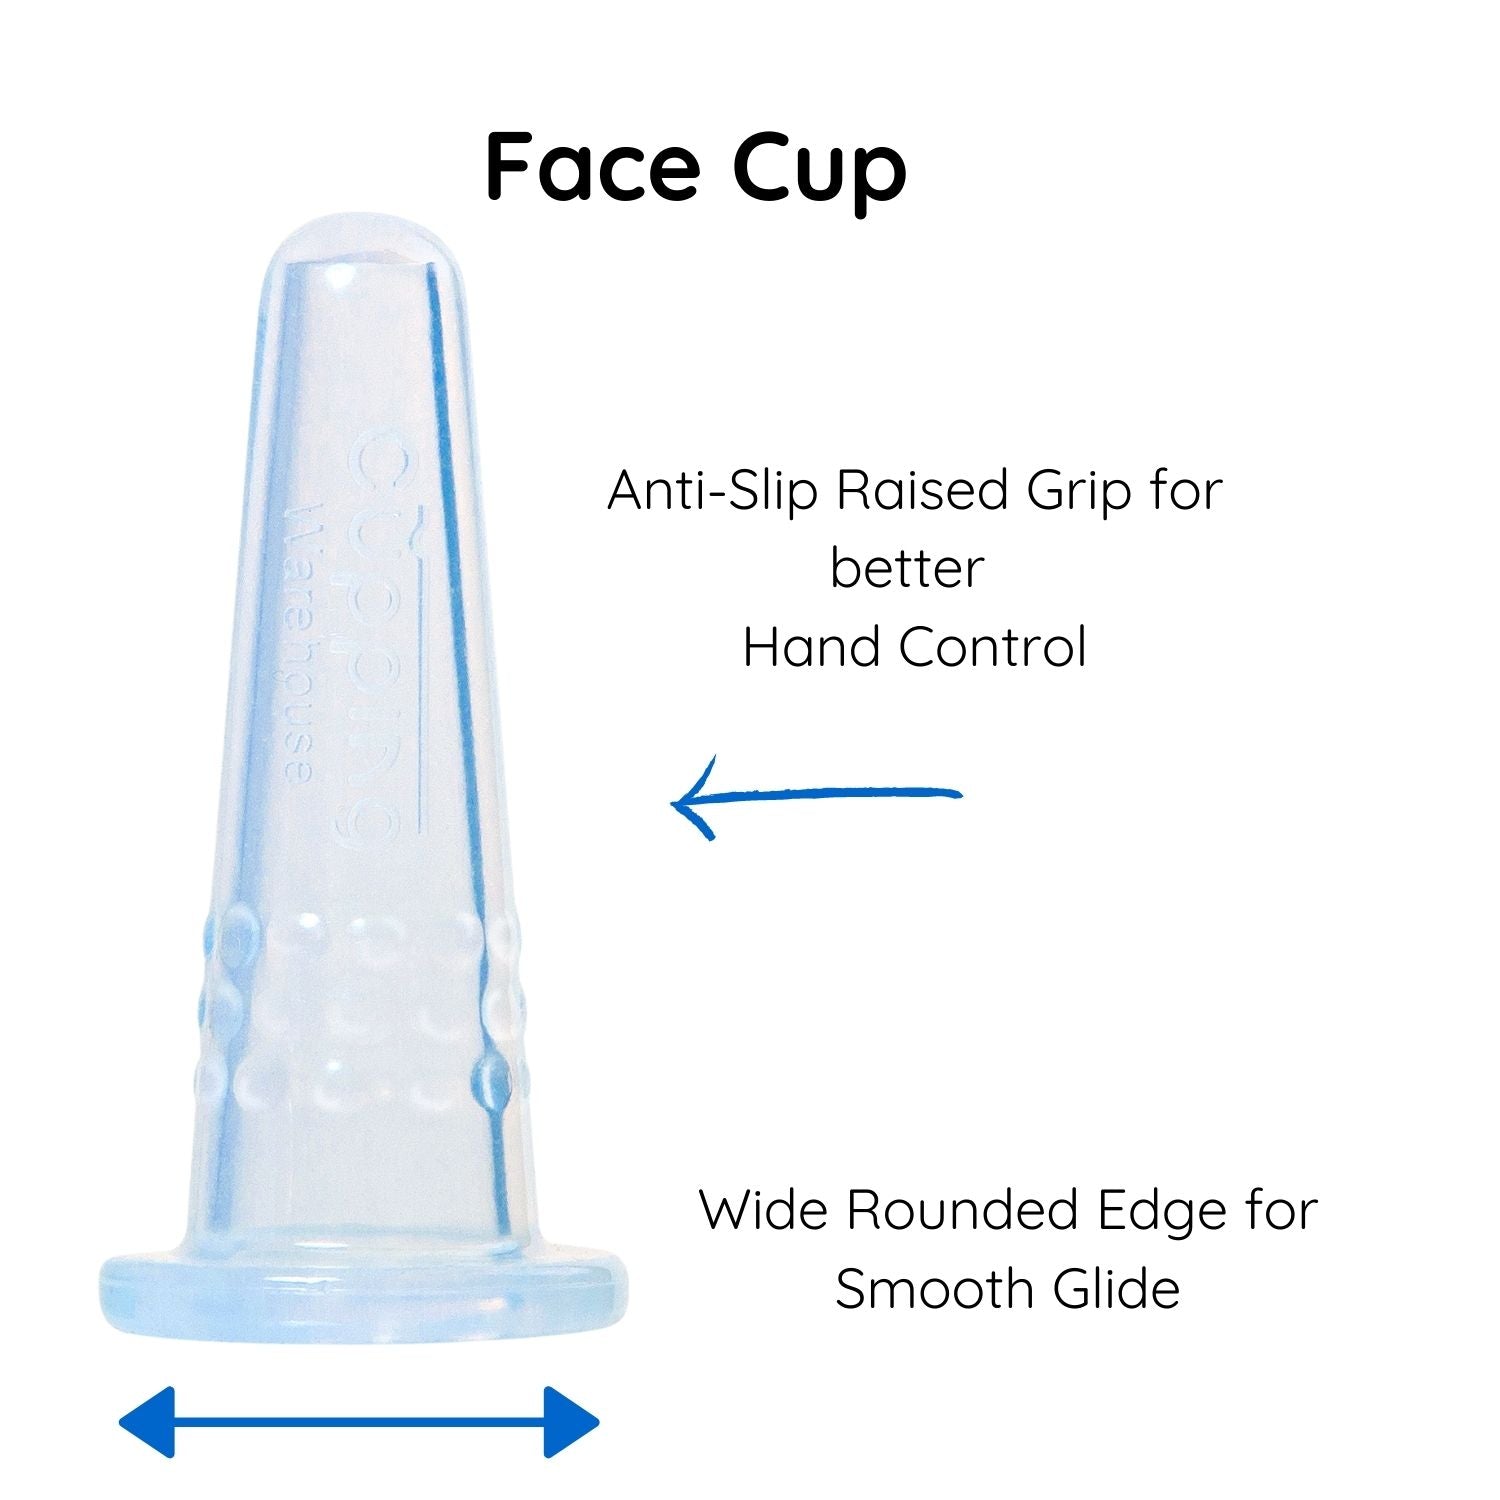 4 Facial Cupping GRIP DEEP PRO 6570 Professional Harder Face Cups – Cupping  Warehouse®